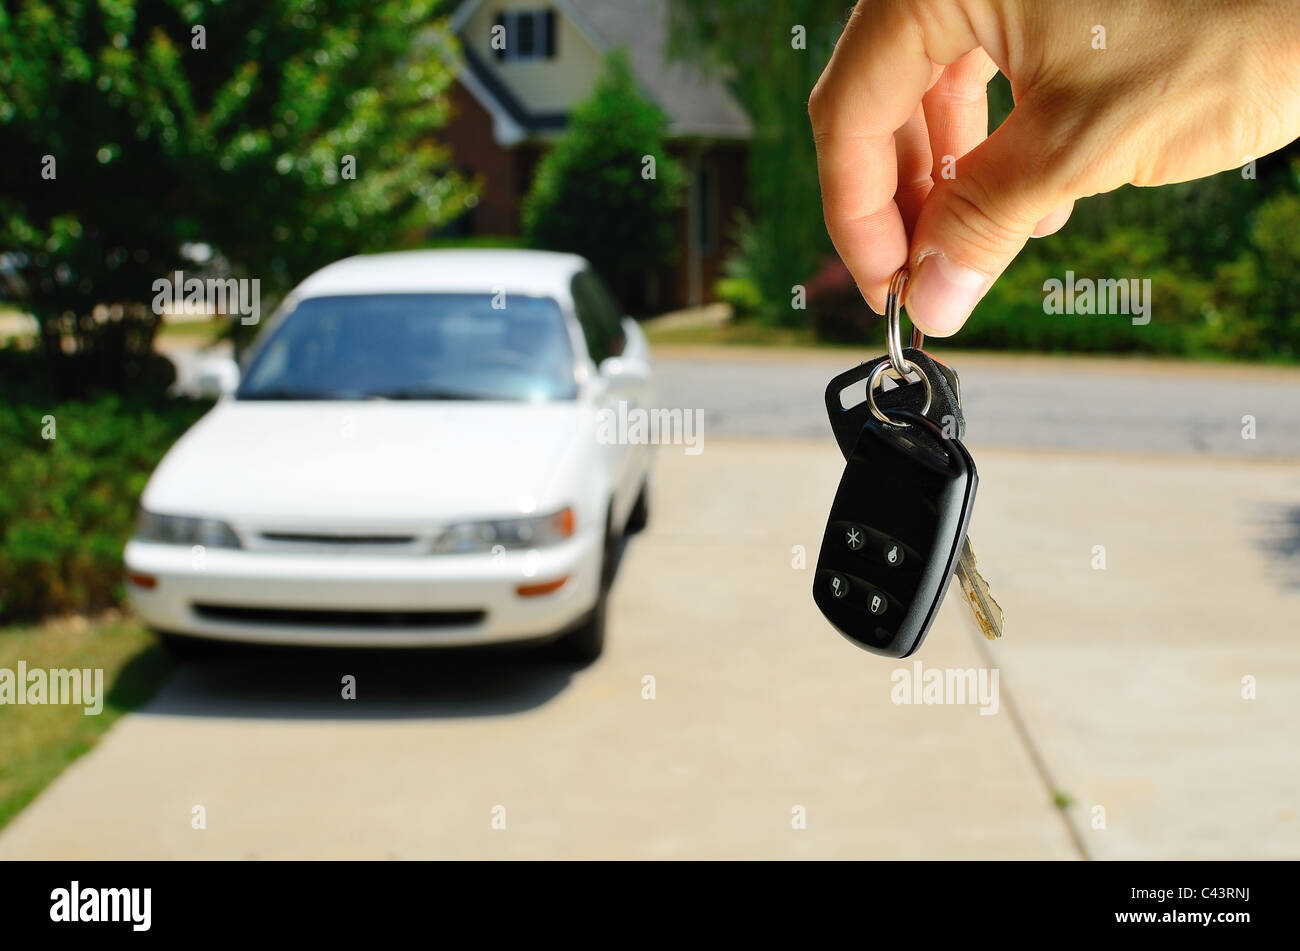 Handing over the keys to a used car. Stock Photo